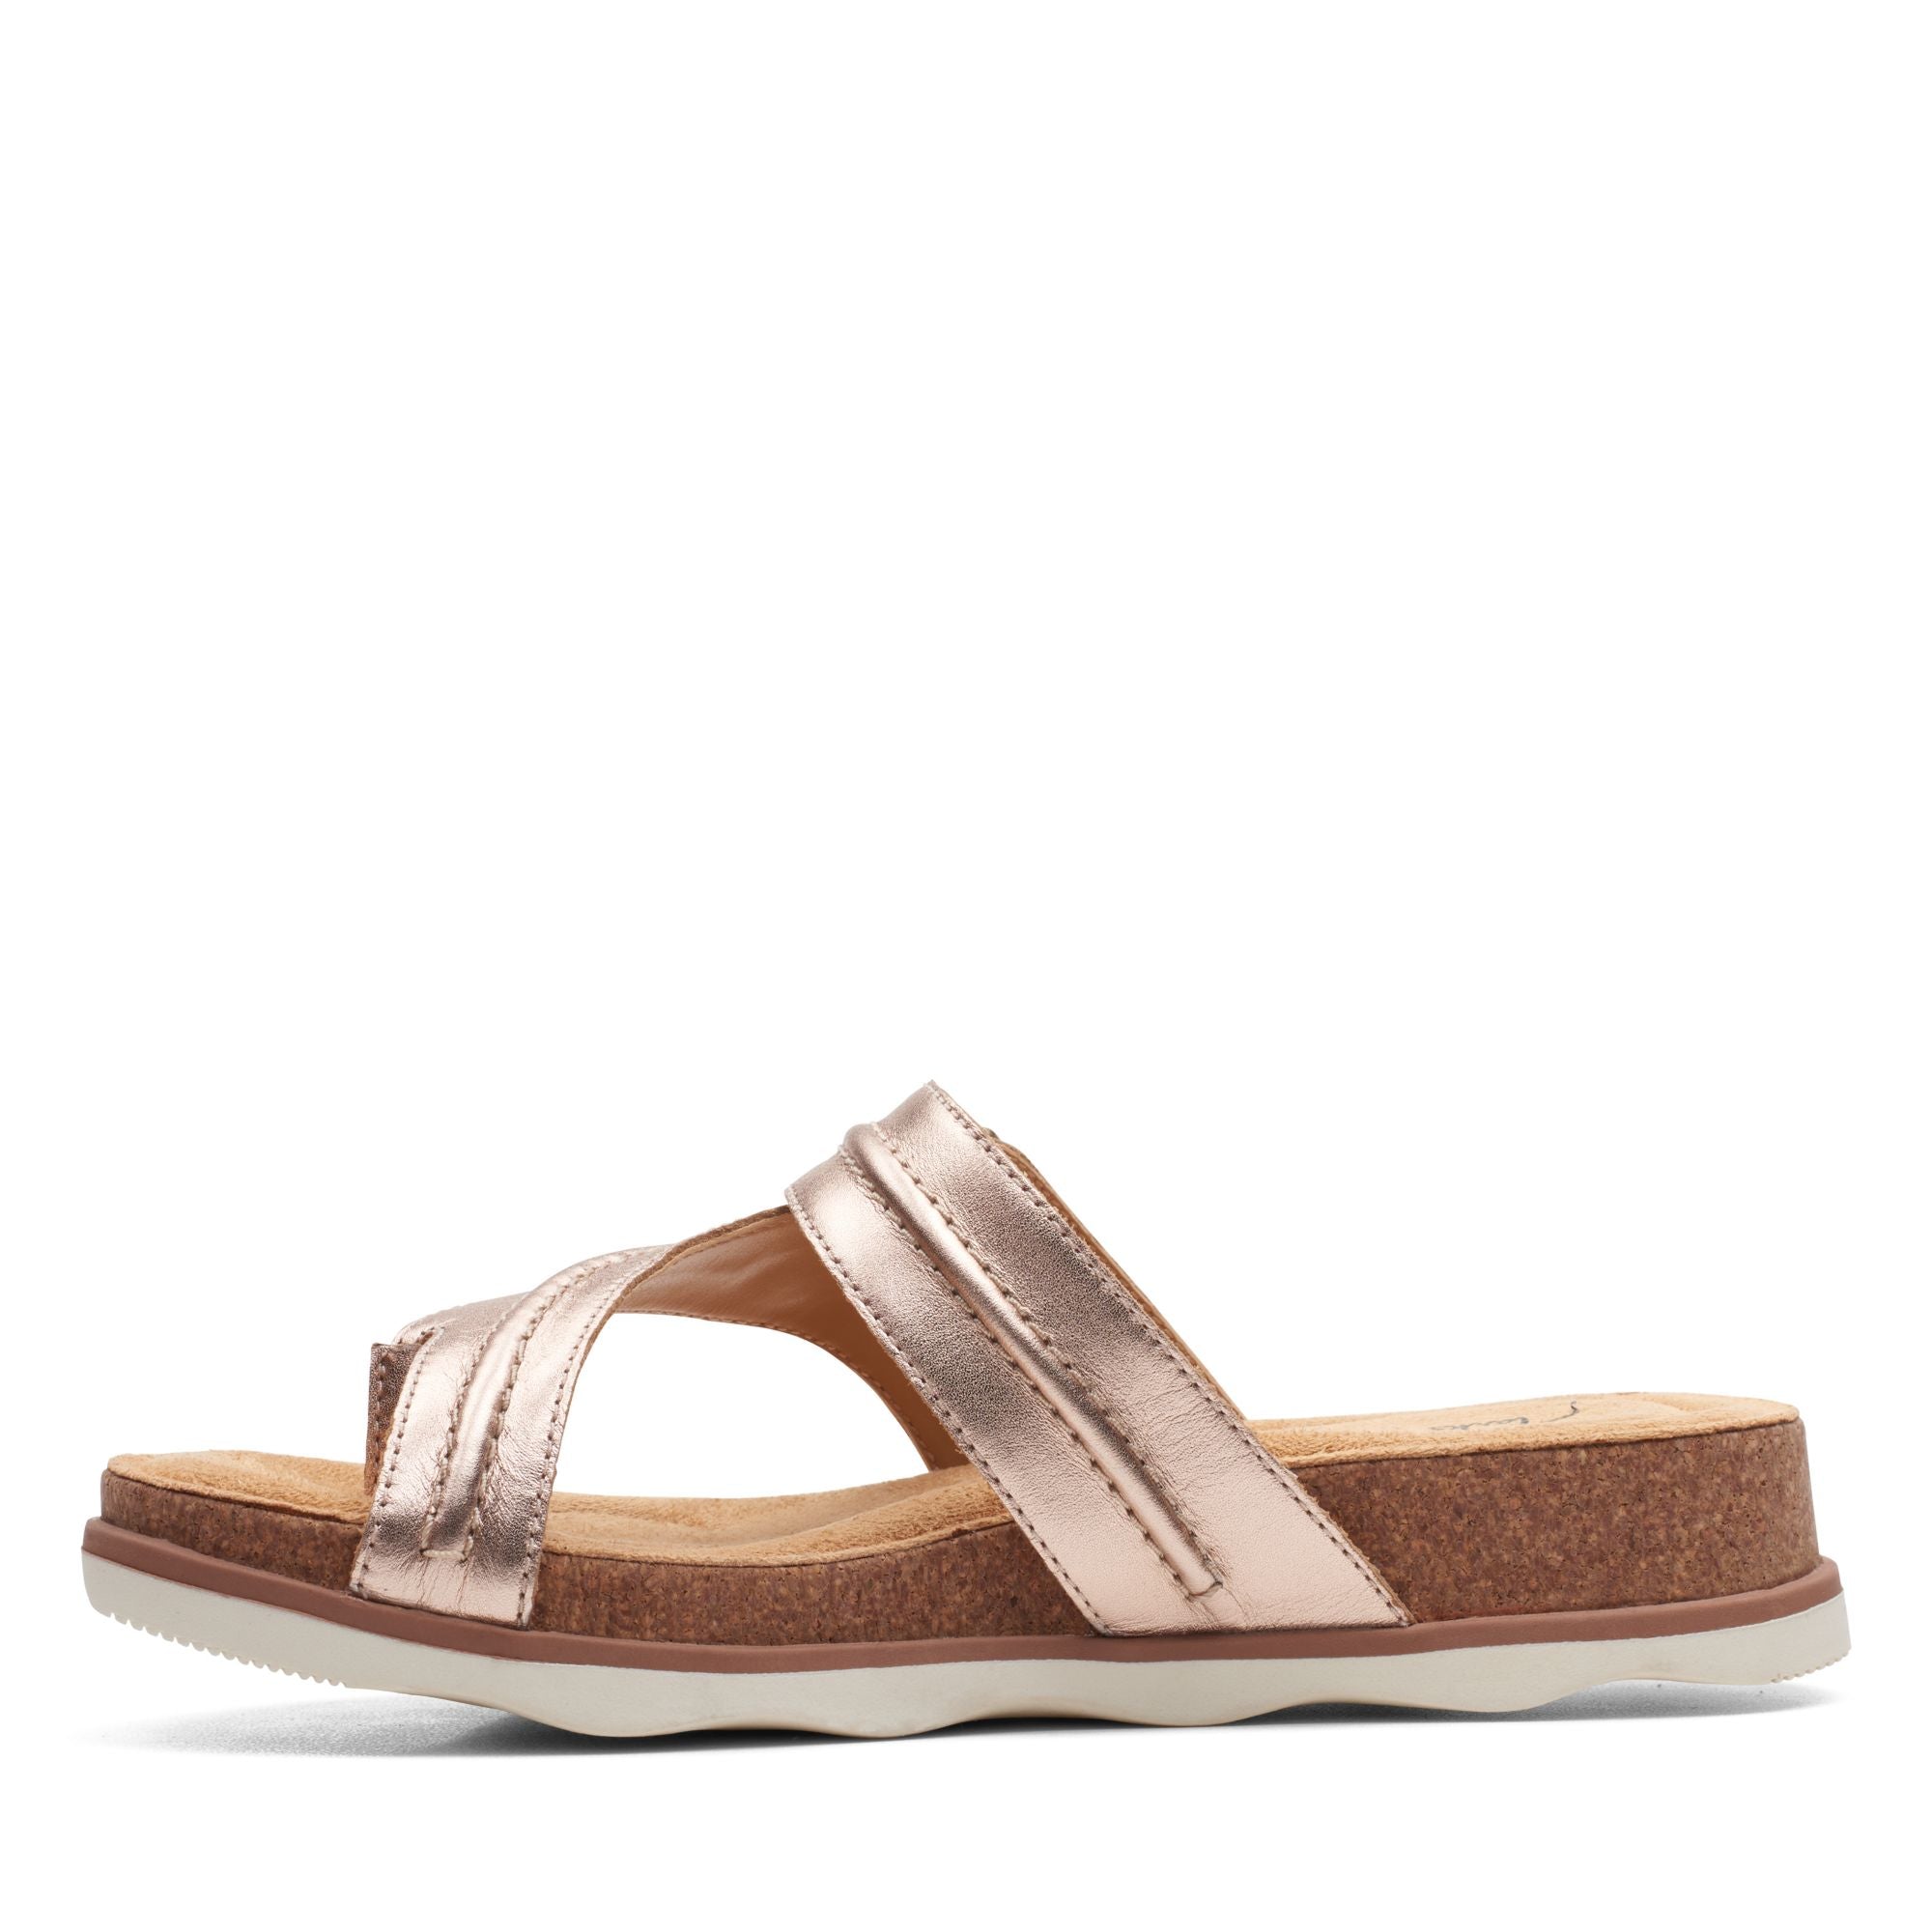 Women's Clarks Brynn Madi Color: Rose Gold Leather